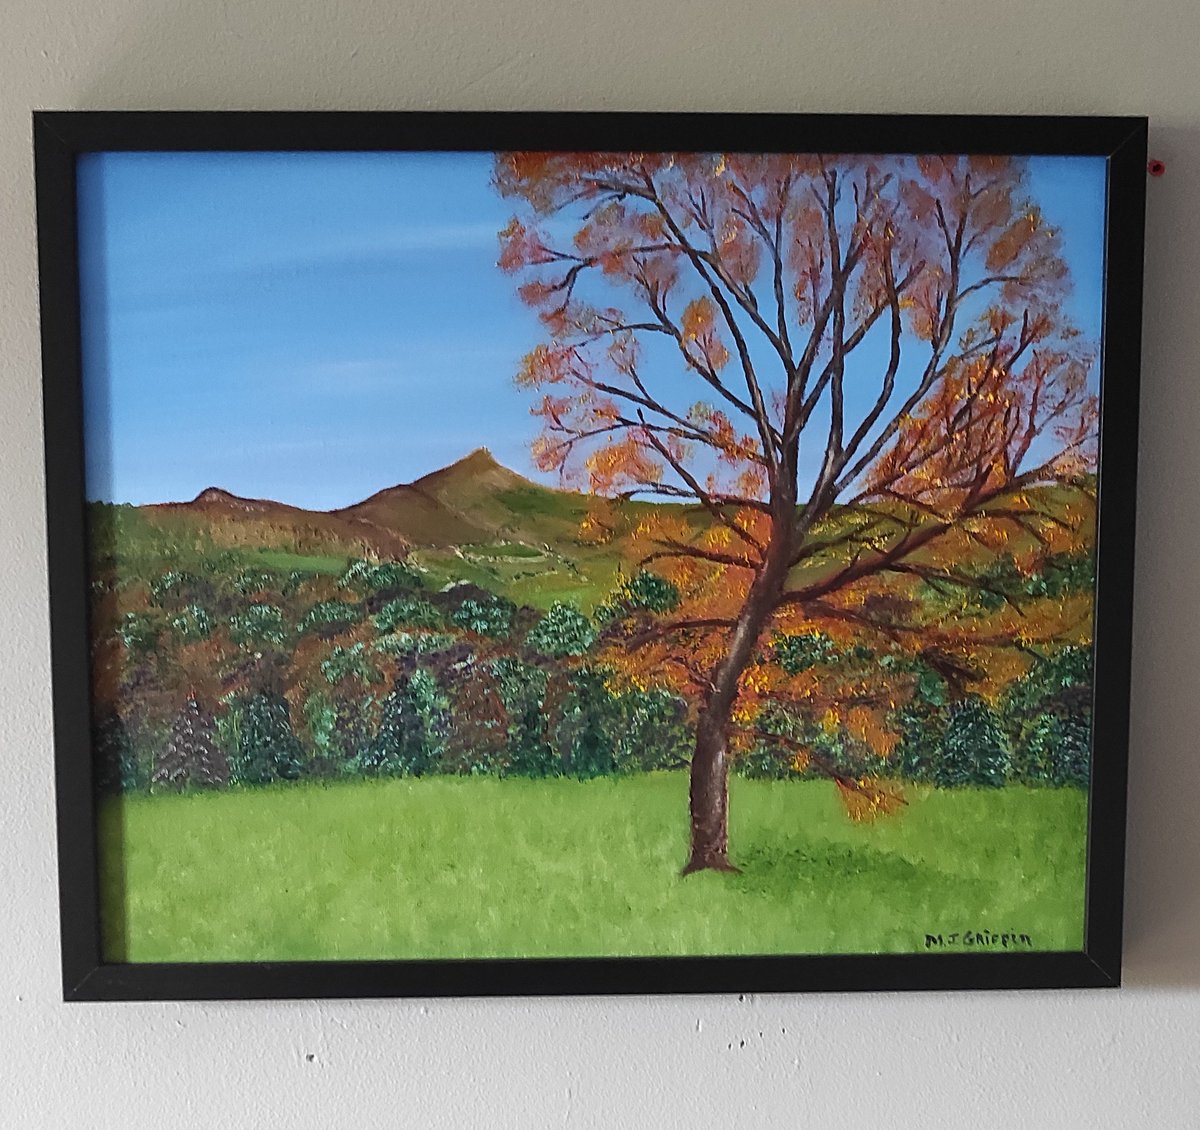 Framed my latest oil painting
'View from Powerscourt'
40 X 50cm.     
€220
michaeljohngriffinart.com